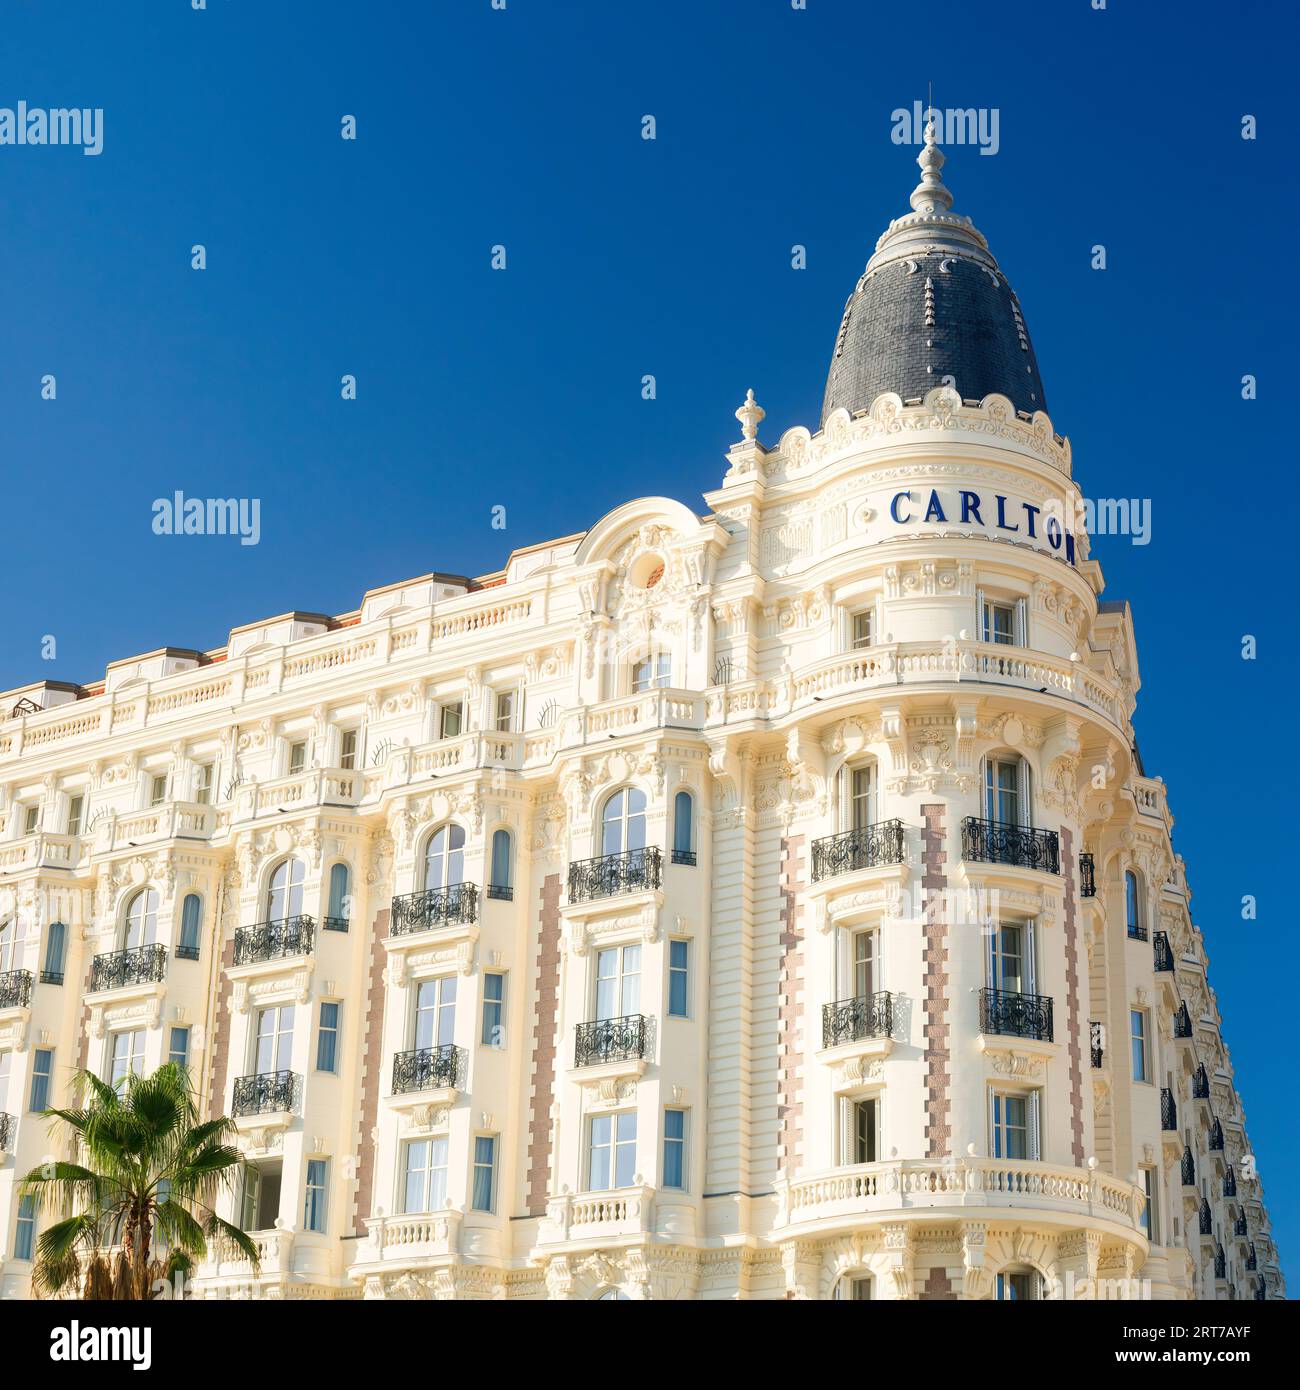 Carlton Hotel in Cannes, French riviera Stock Photo